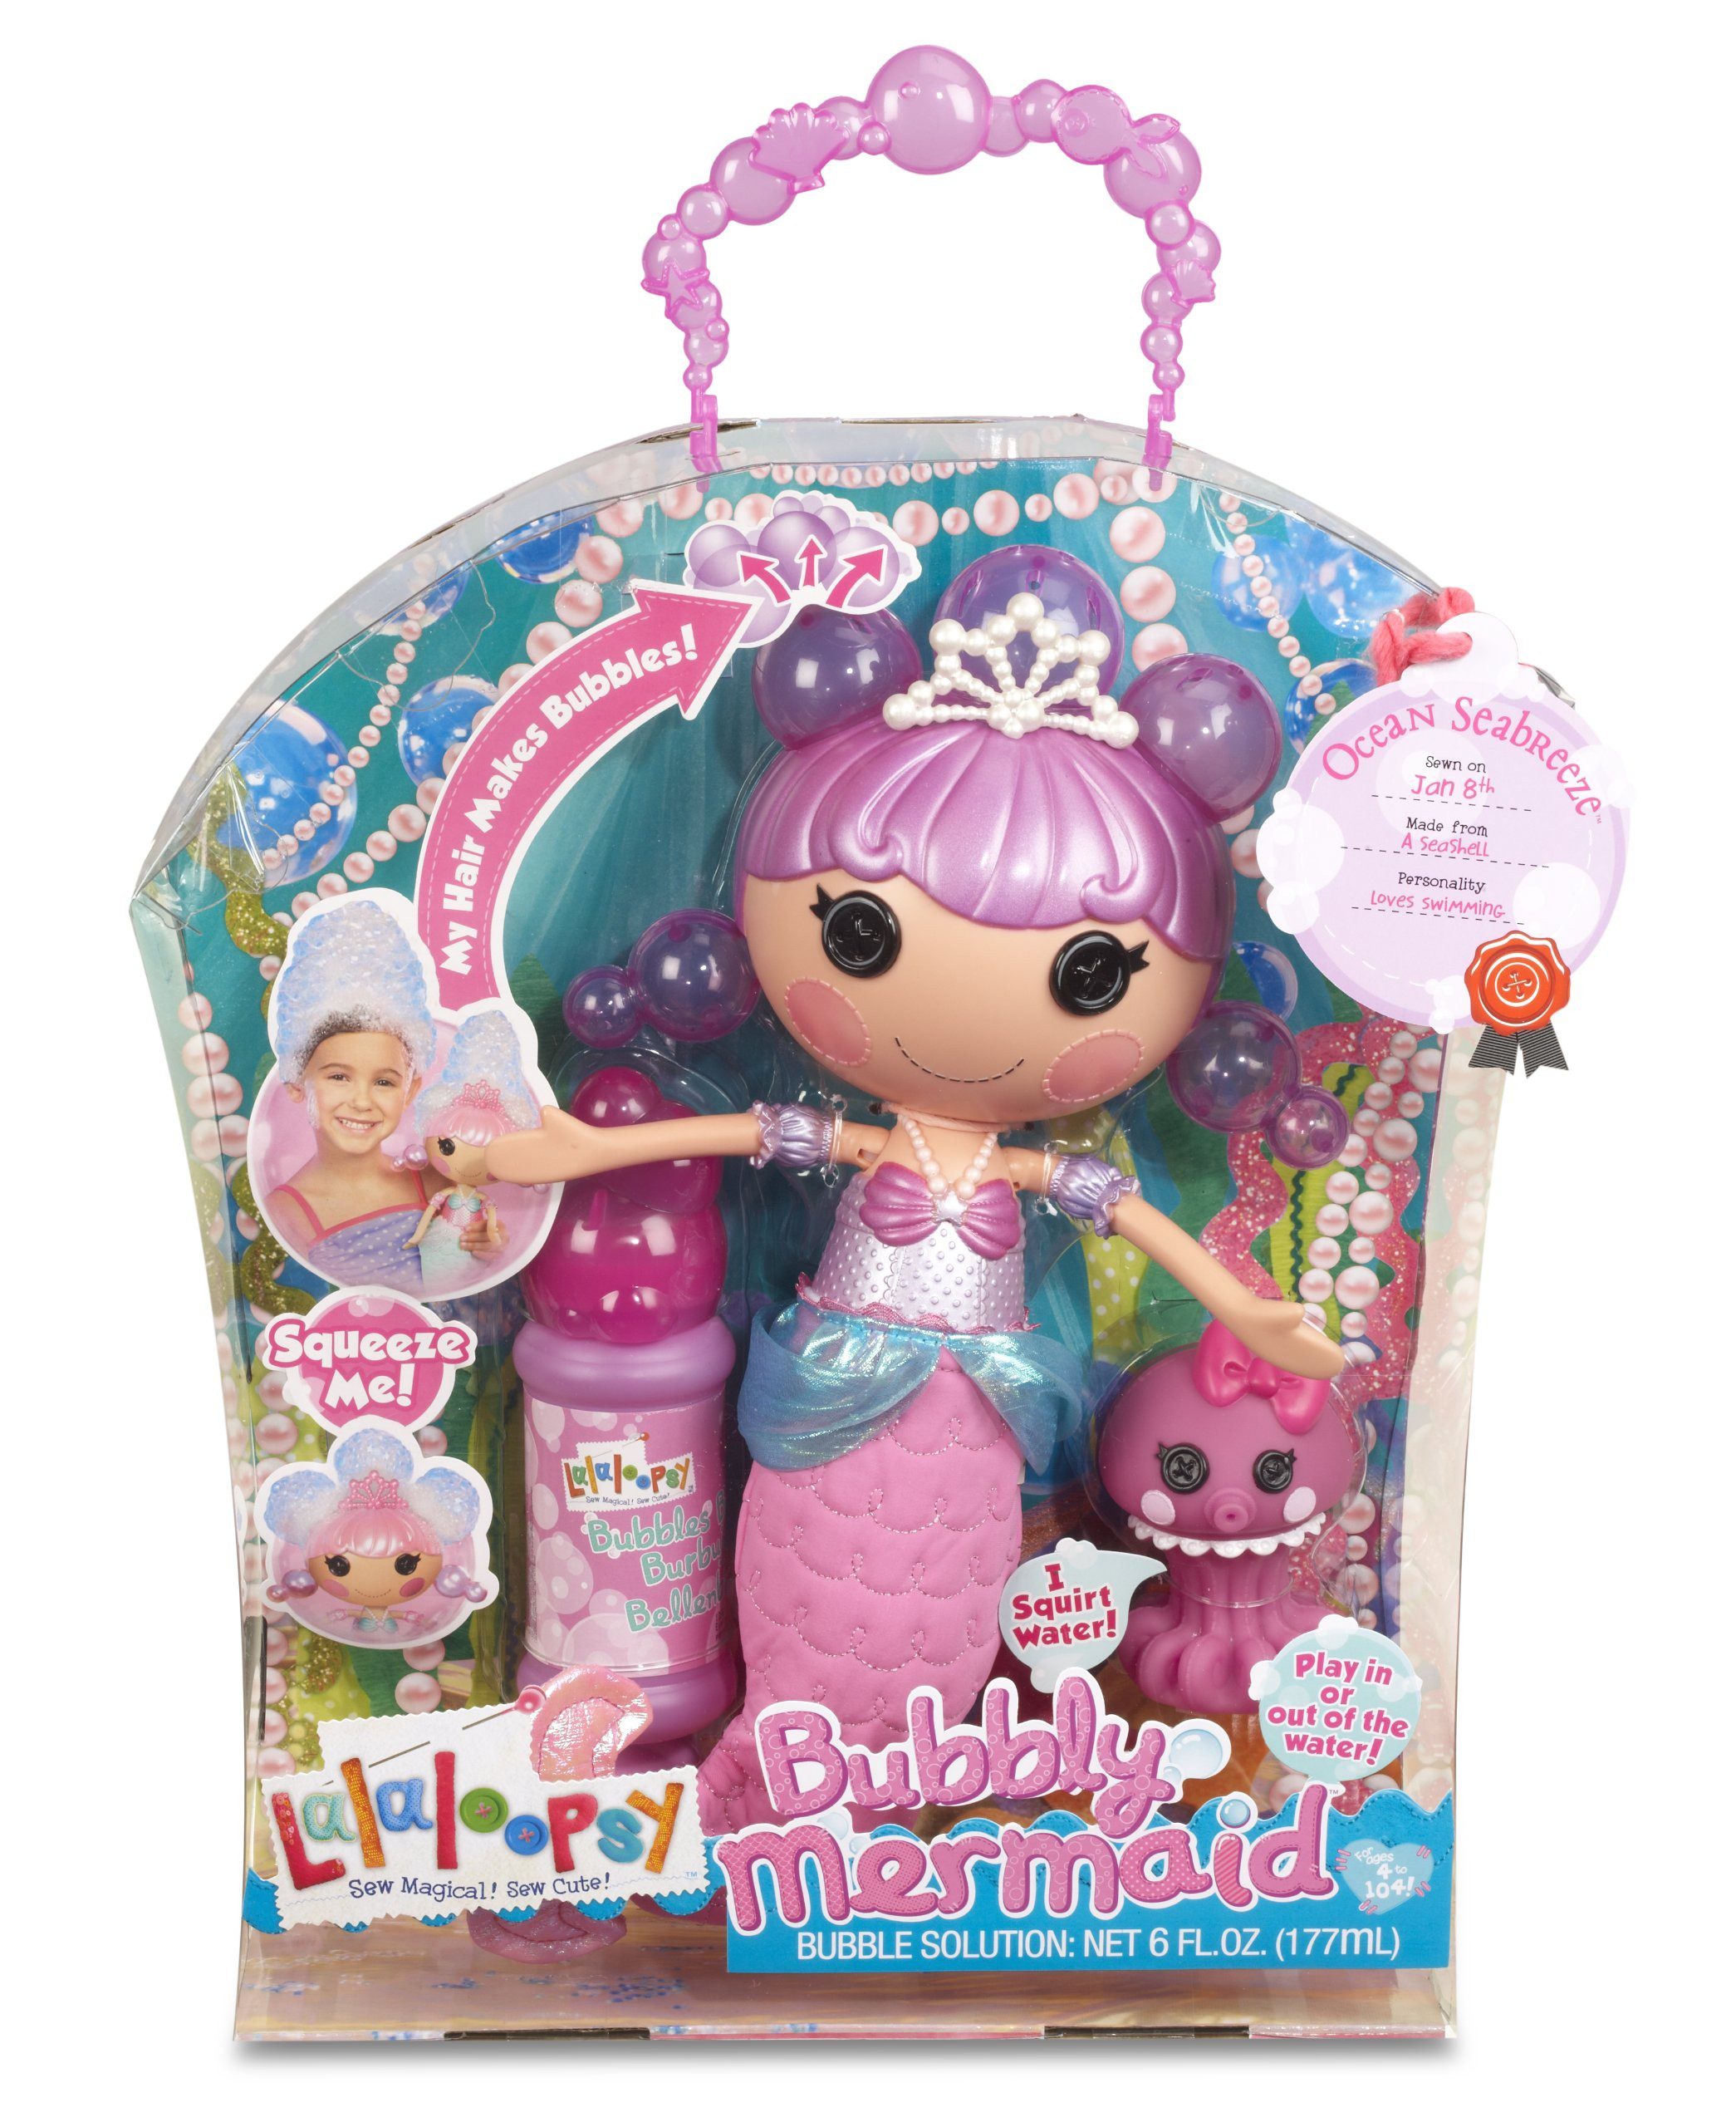 Summertime Fun with the Lalaloopsy Bubbly Mermaids™ {Giveaway}